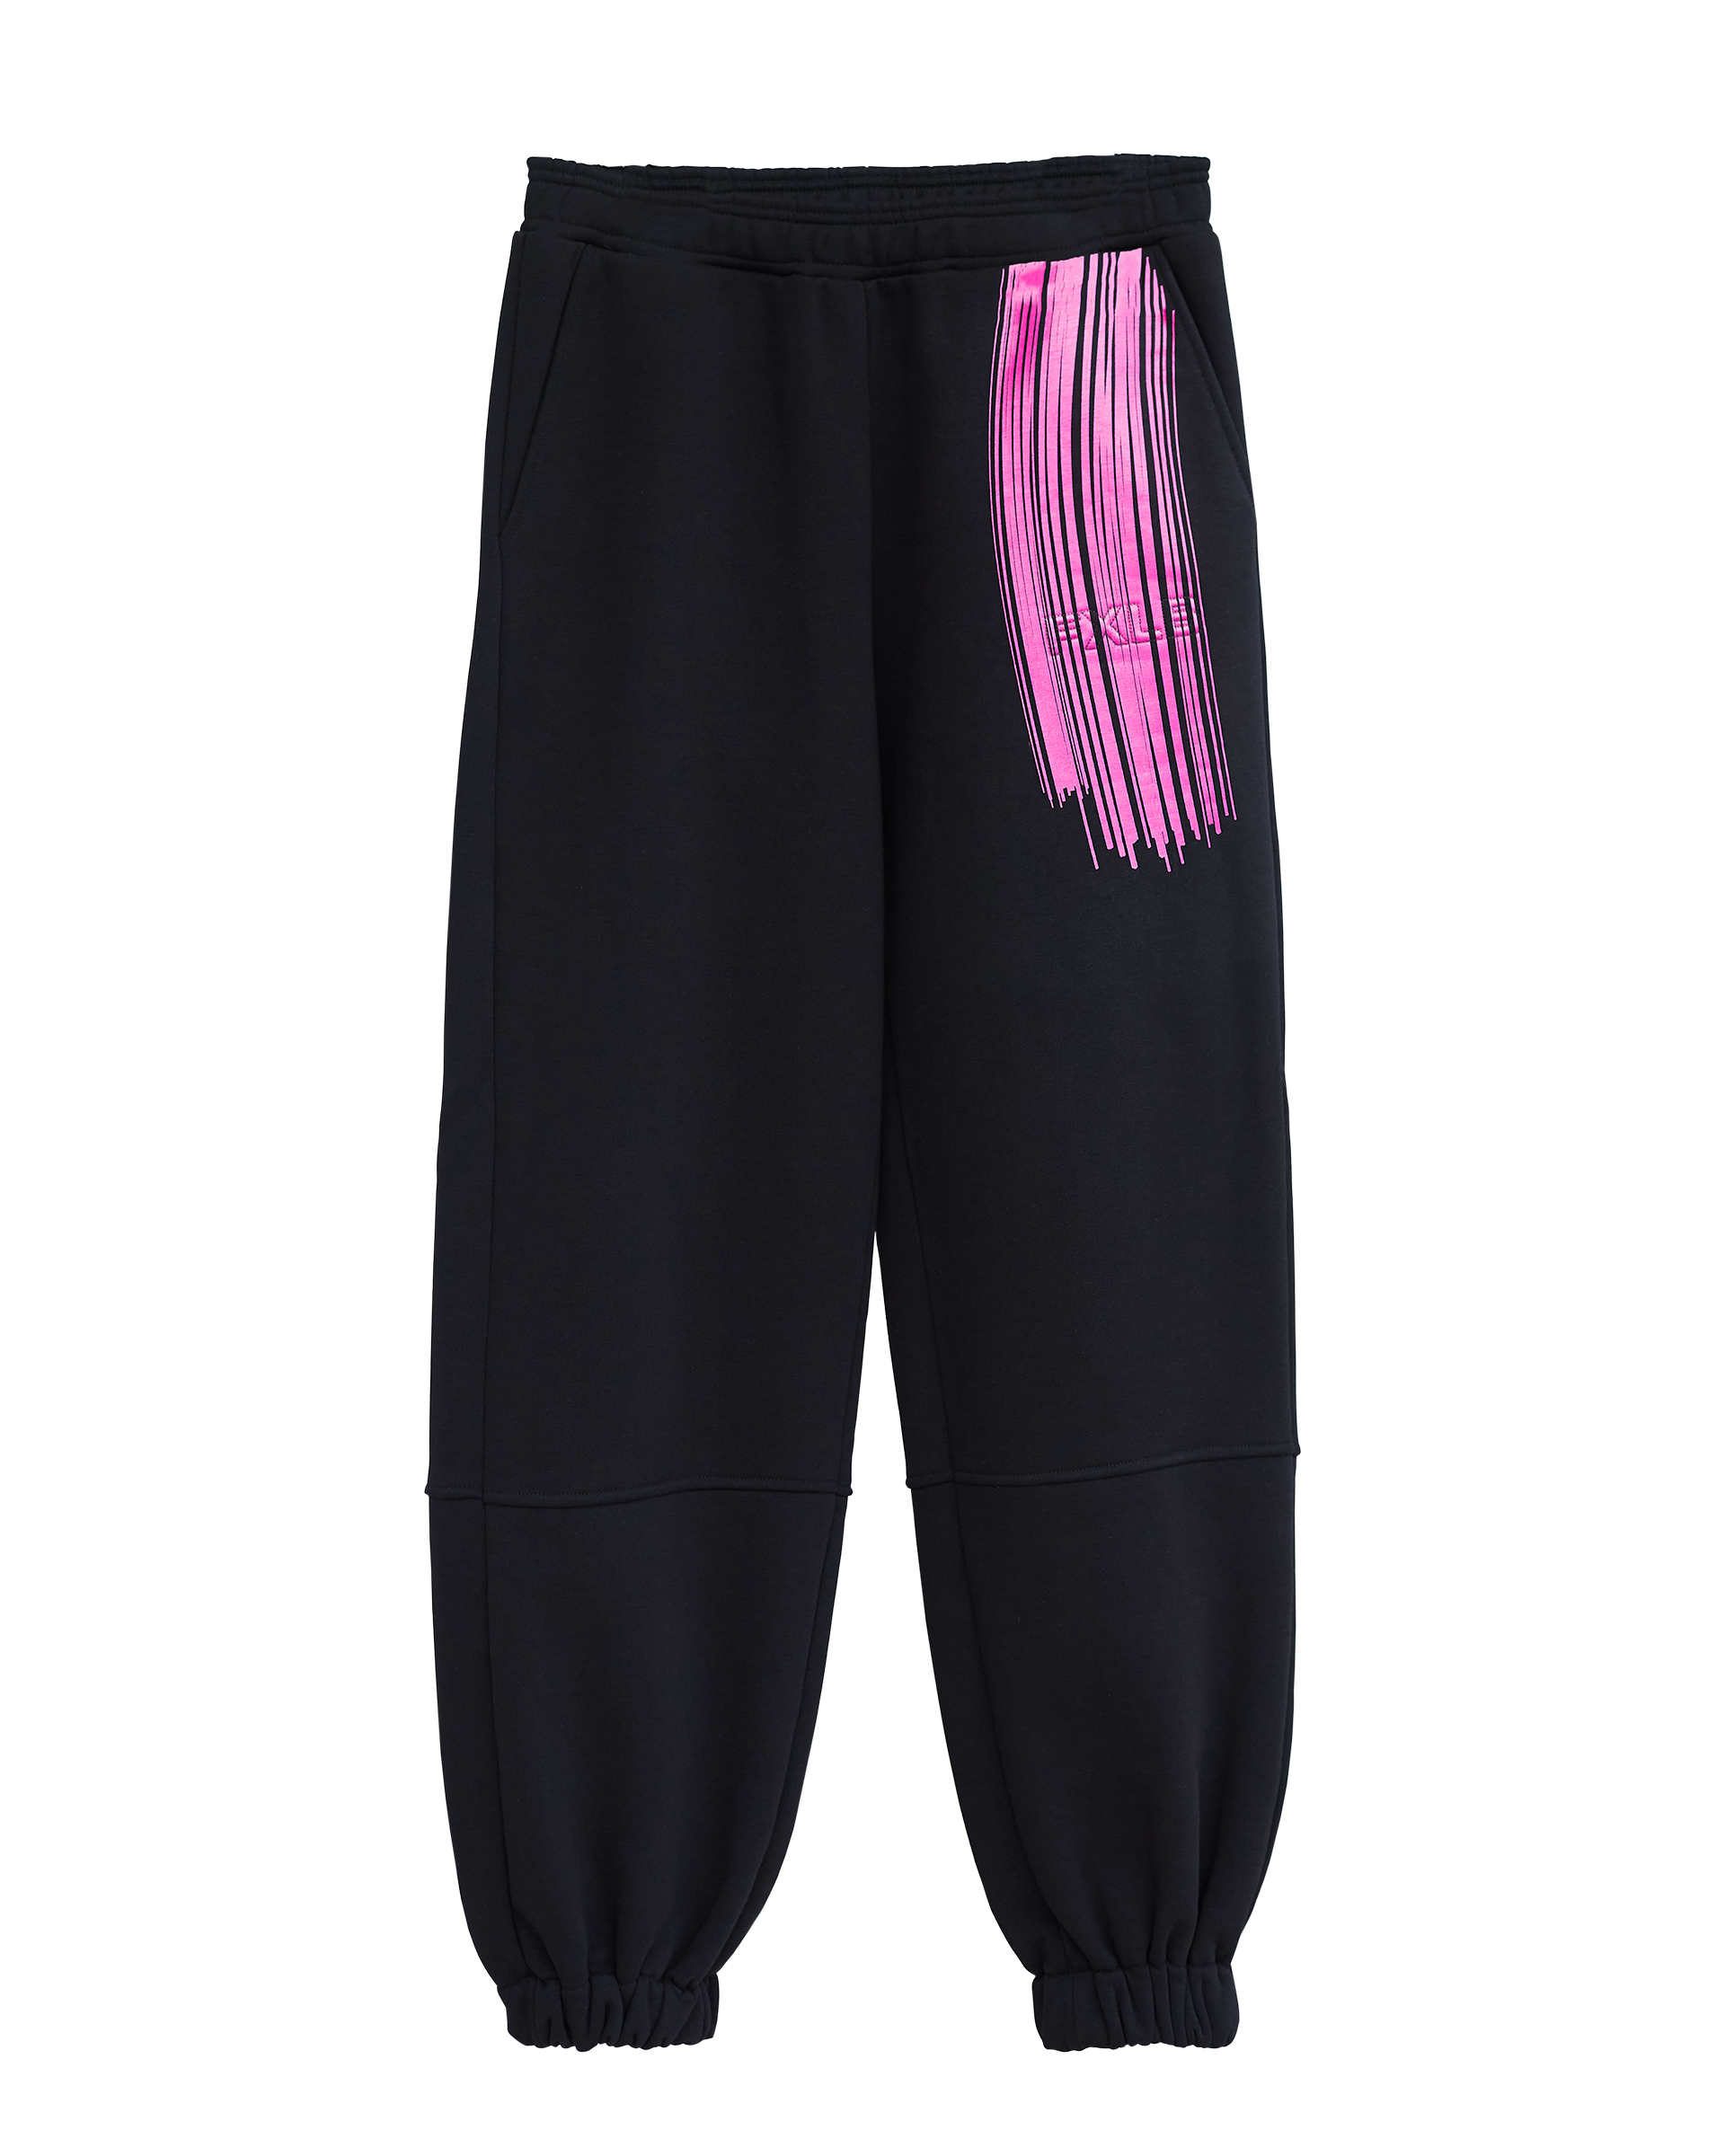 Black Track Fleece Pants with the print “Tied Heart”